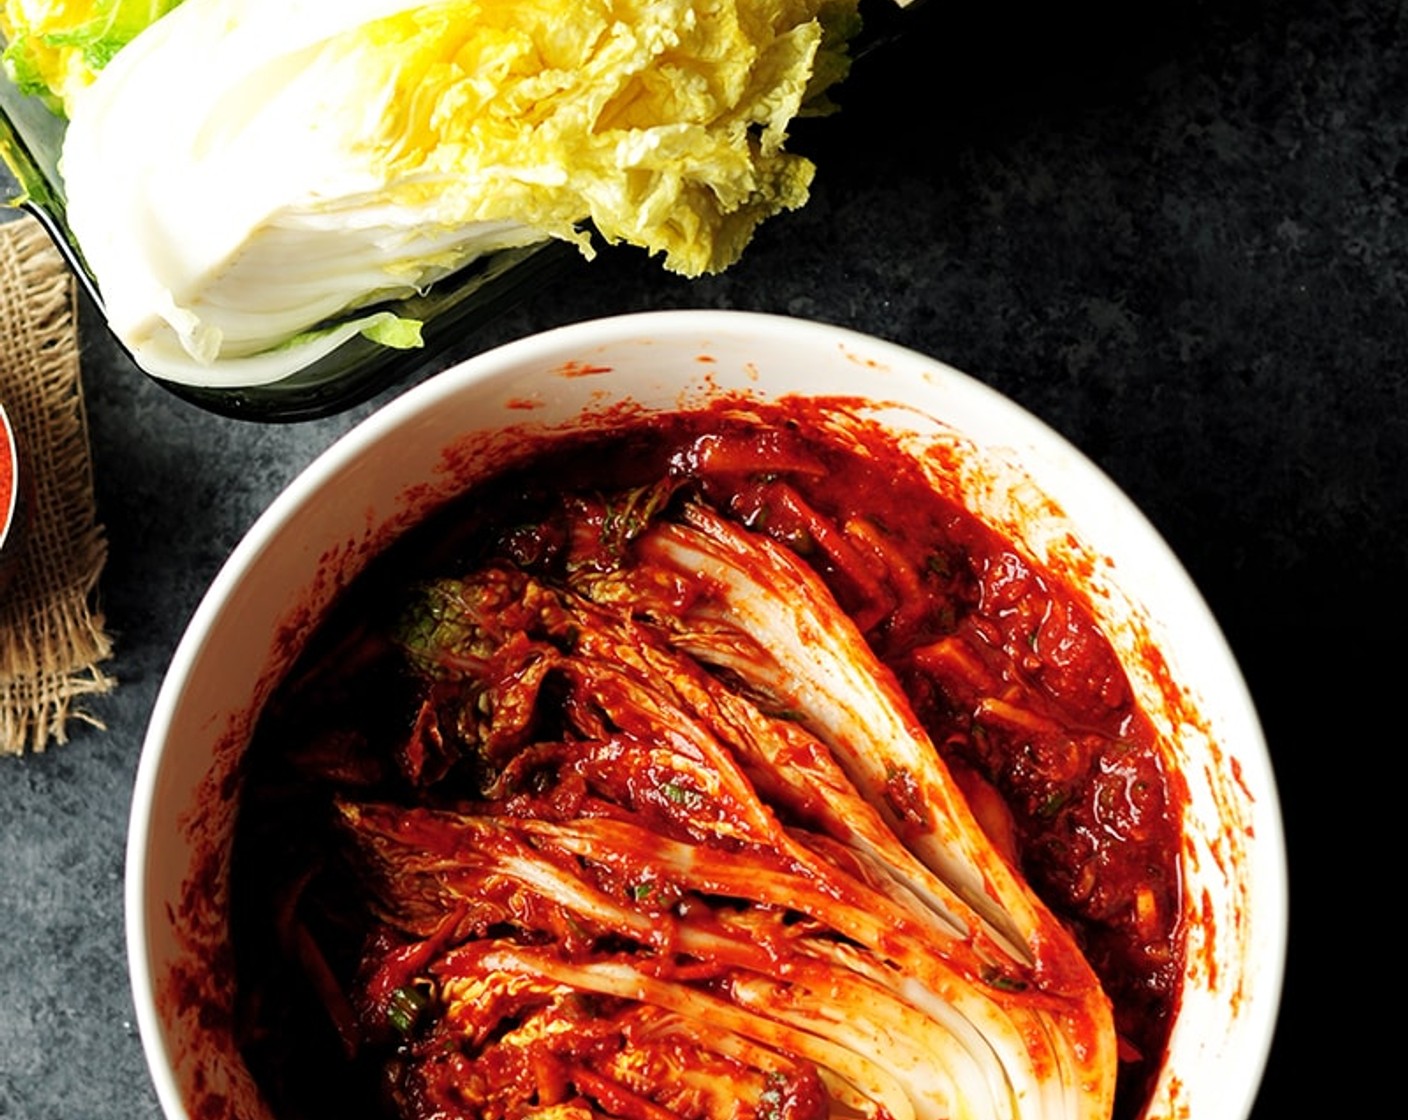 step 11 Time to make the kimchi. Wear gloves and press the cabbage quarters in the kimchi paste, one at a time, spreading some pastern each cabbage leaf. When the cabbage quarter is covered with the kimchi paste, lift it up and fold the leaves towards the core.